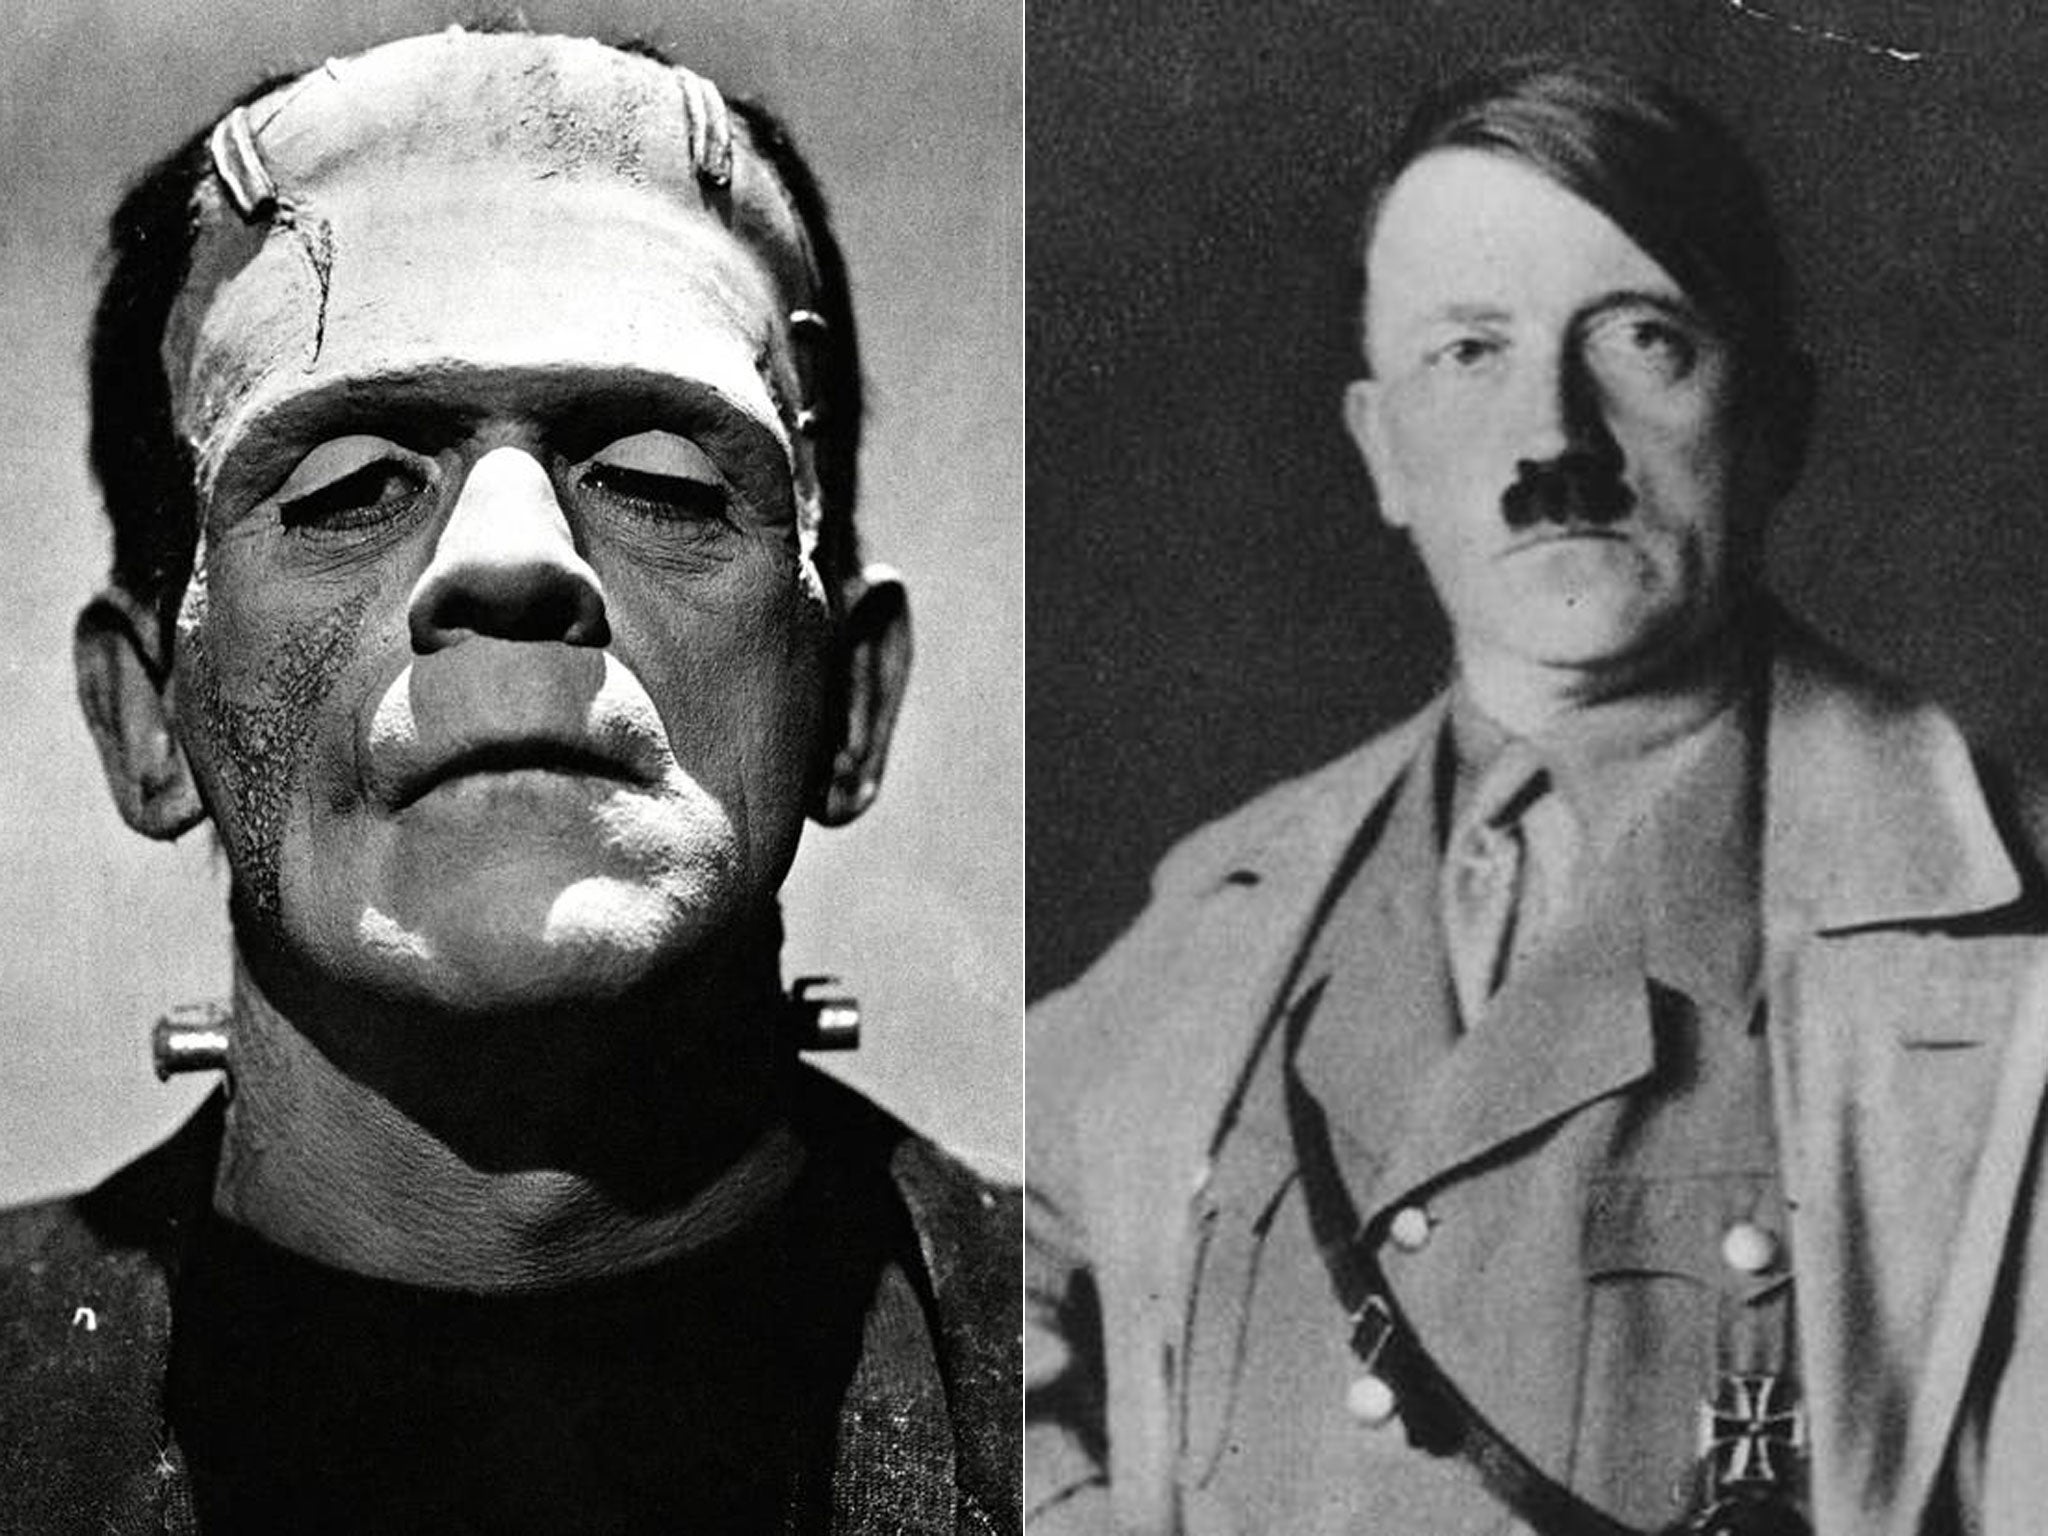 Among the options for voters in the forthcoming elections are Adolf Hitler or and Frankenstein.